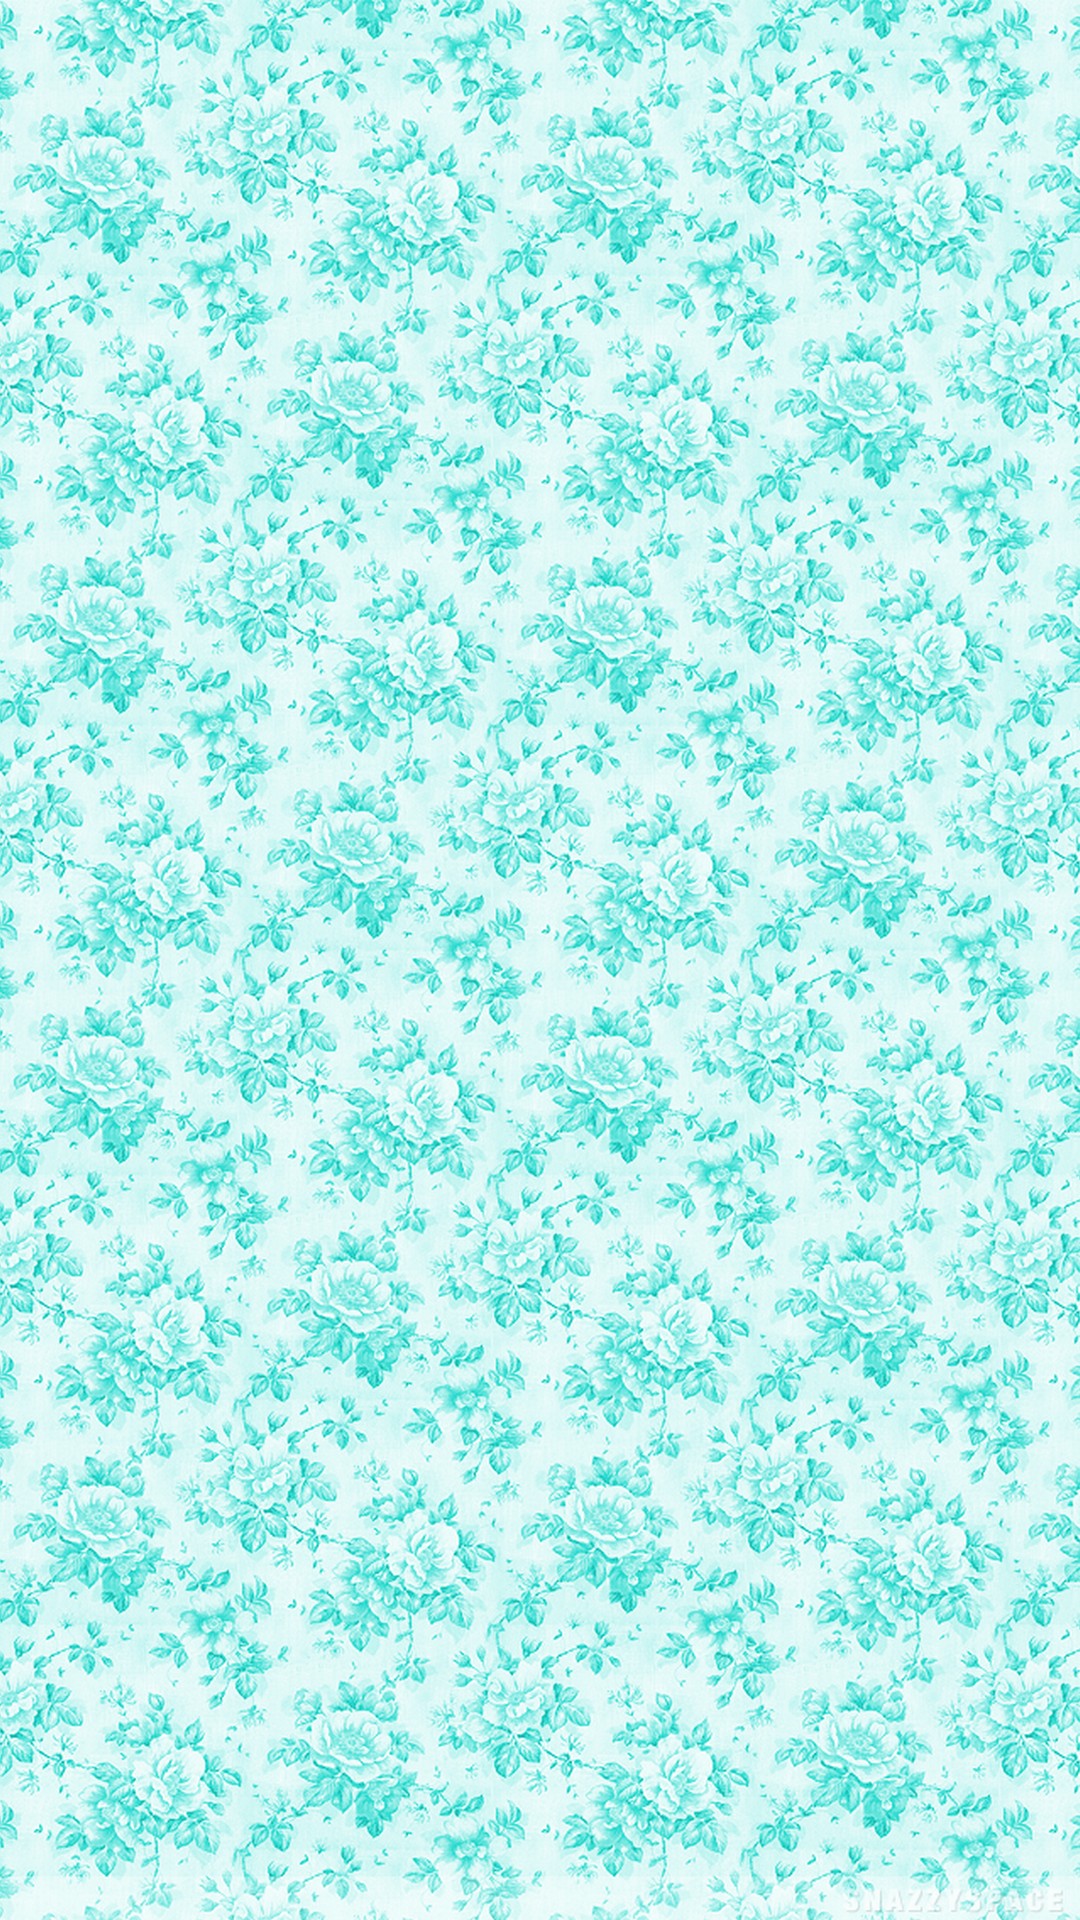 Blue Green Wallpaper For Android with resolution 1080X1920 pixel. You can make this wallpaper for your Android backgrounds, Tablet, Smartphones Screensavers and Mobile Phone Lock Screen